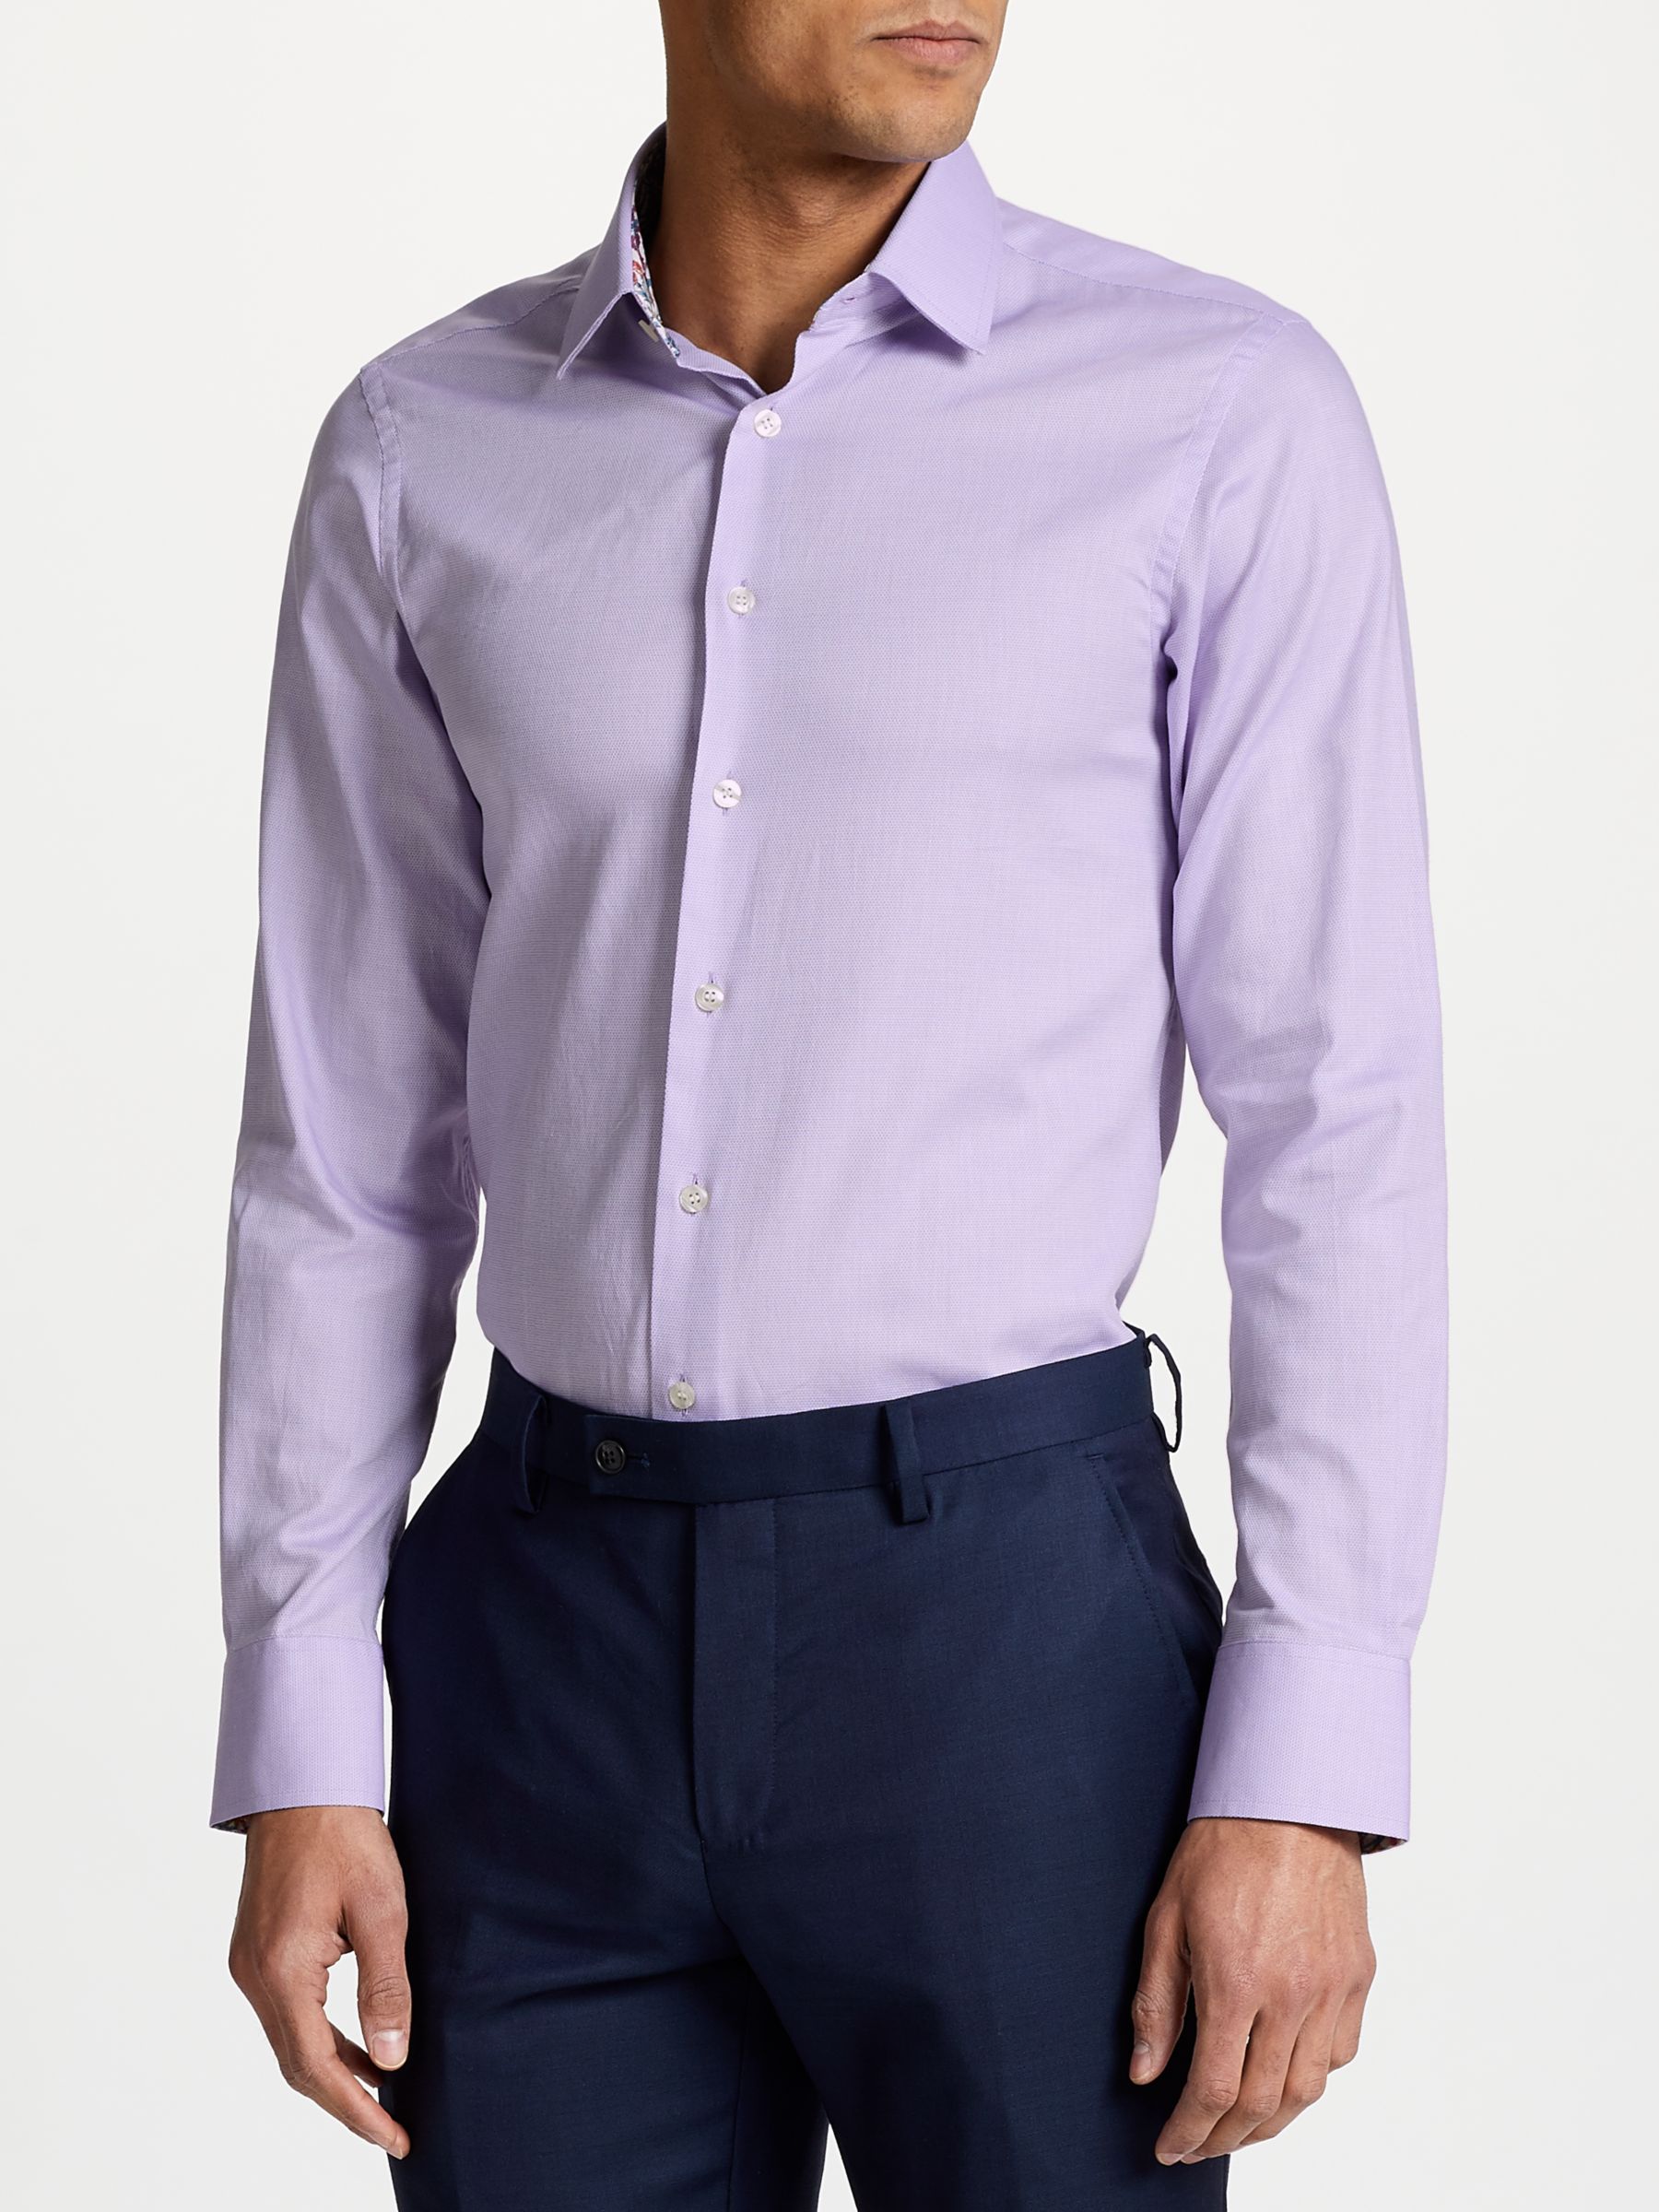 Smyth & Gibson Circle Weave 100s Cotton Slim Fit Shirt, Lilac, 17.5